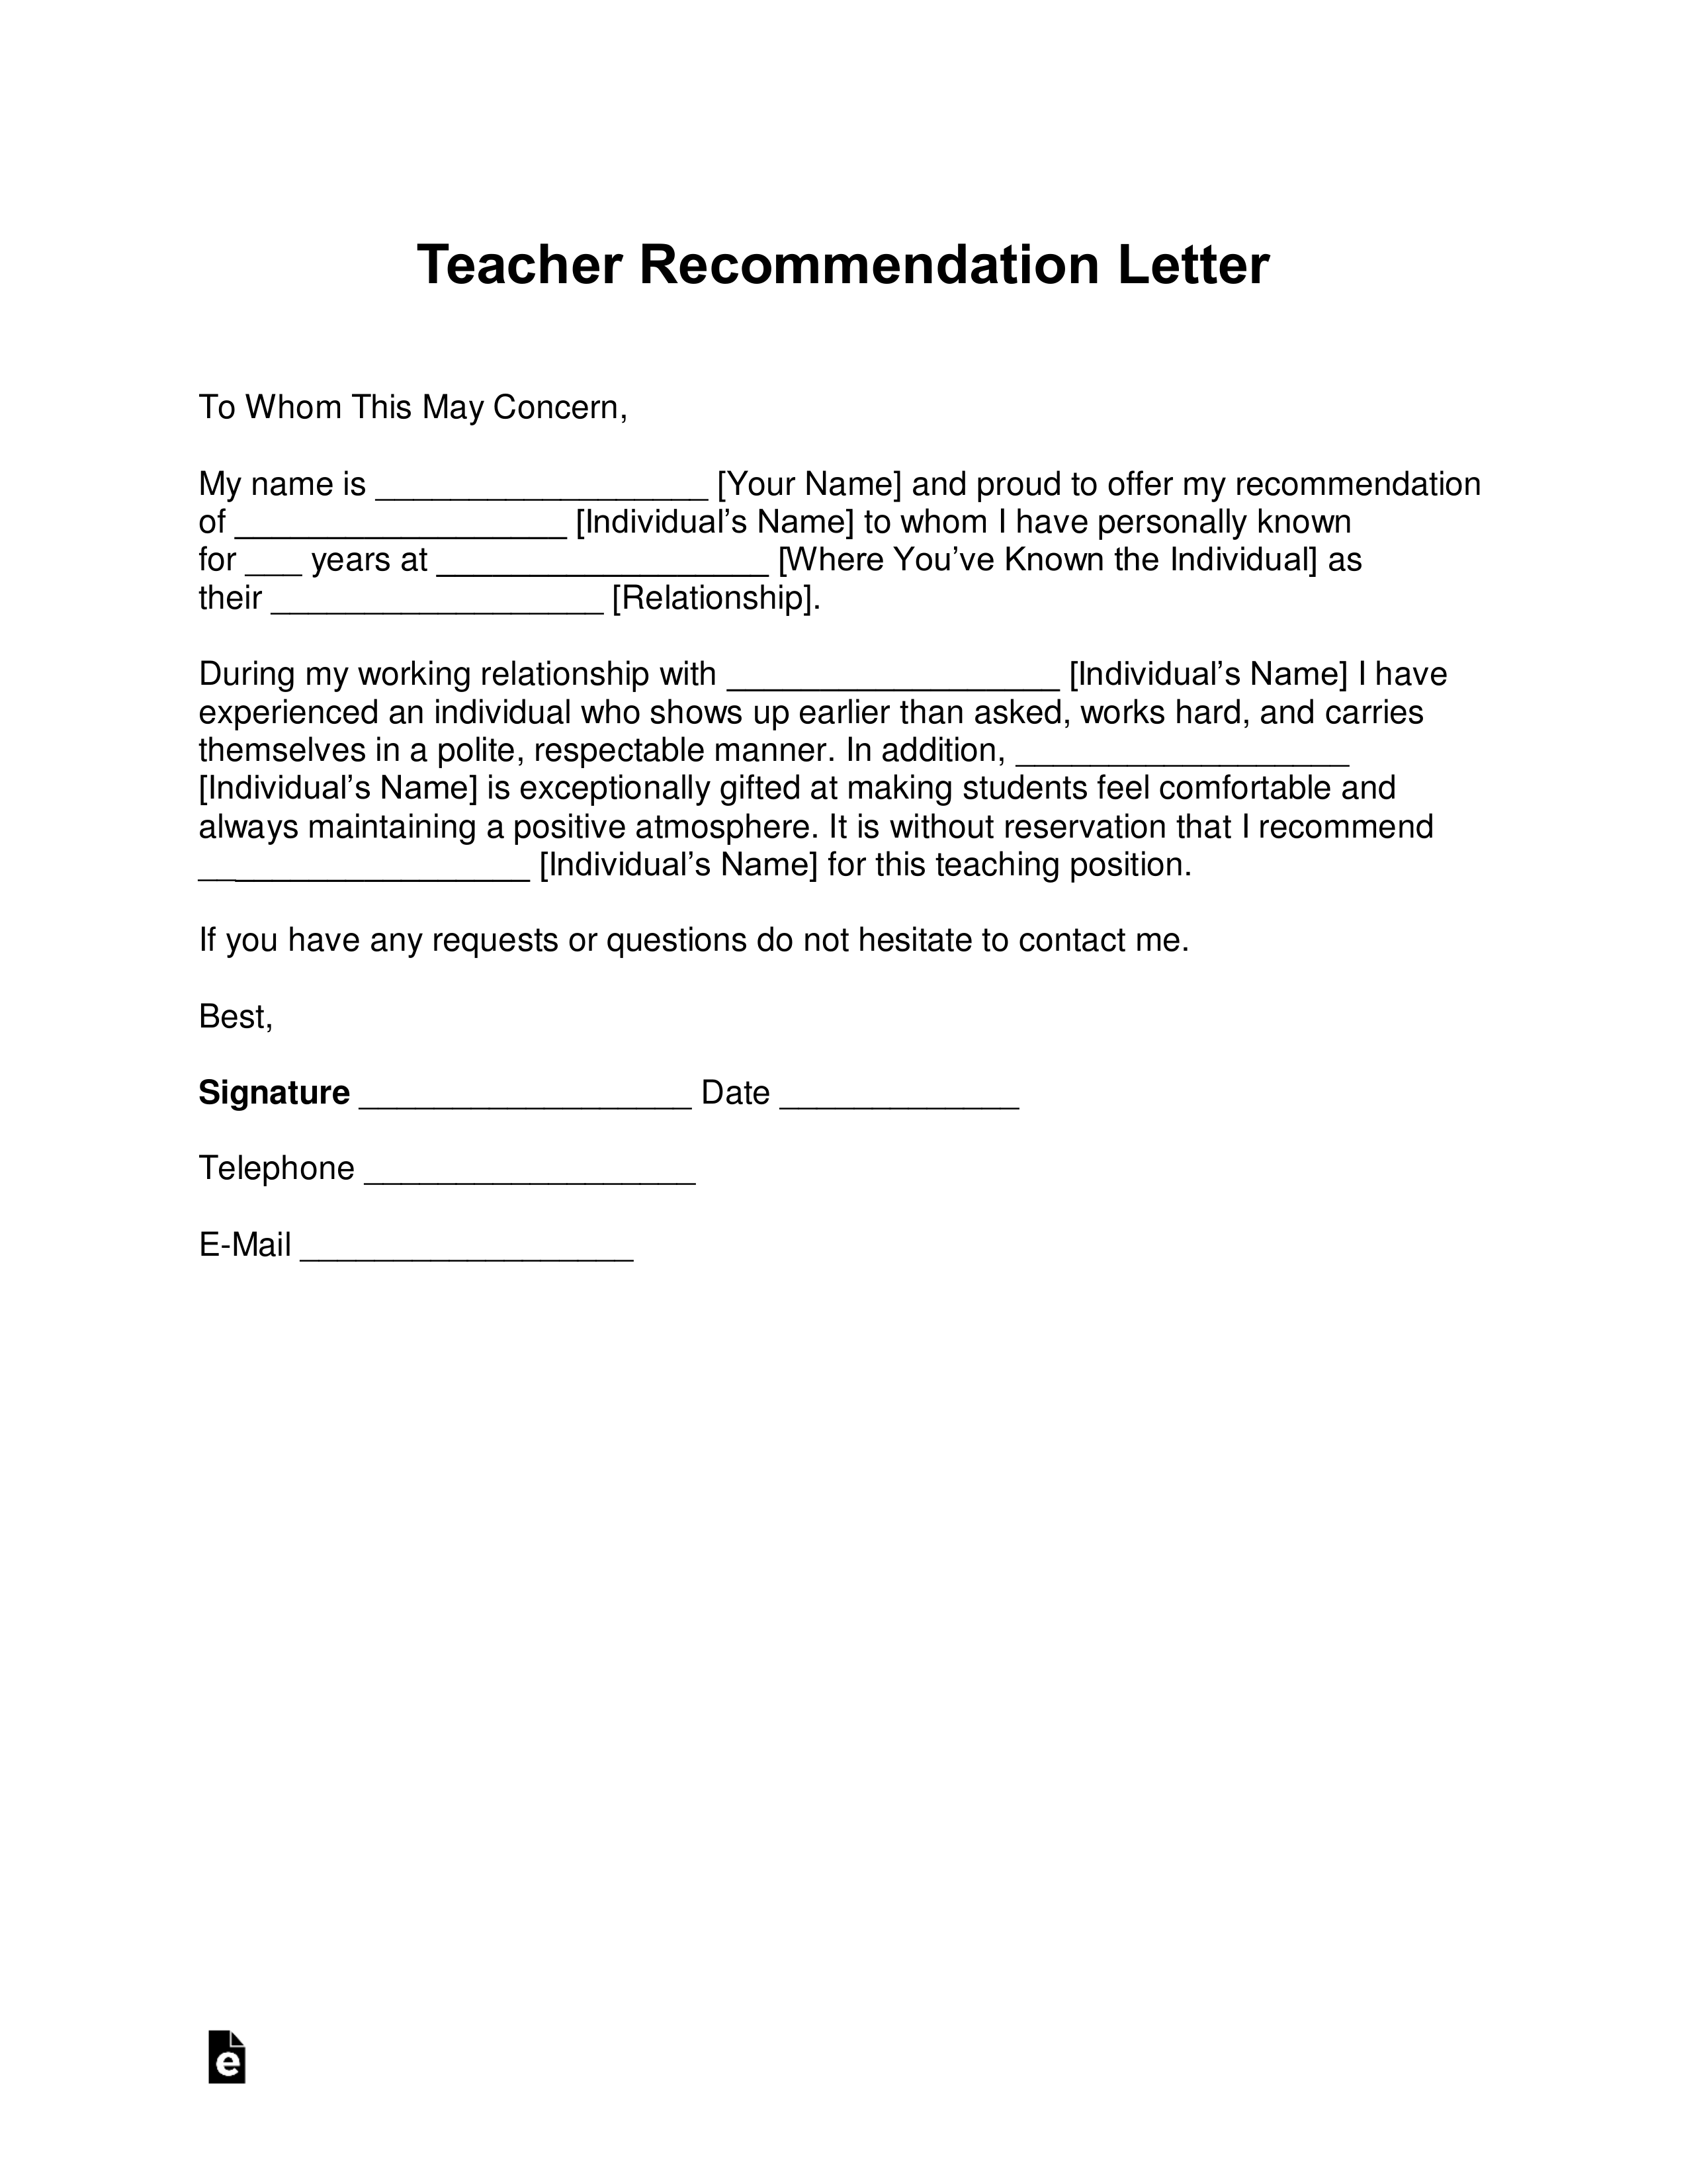 Letter Of Recommendation From A Teacher from eforms.com